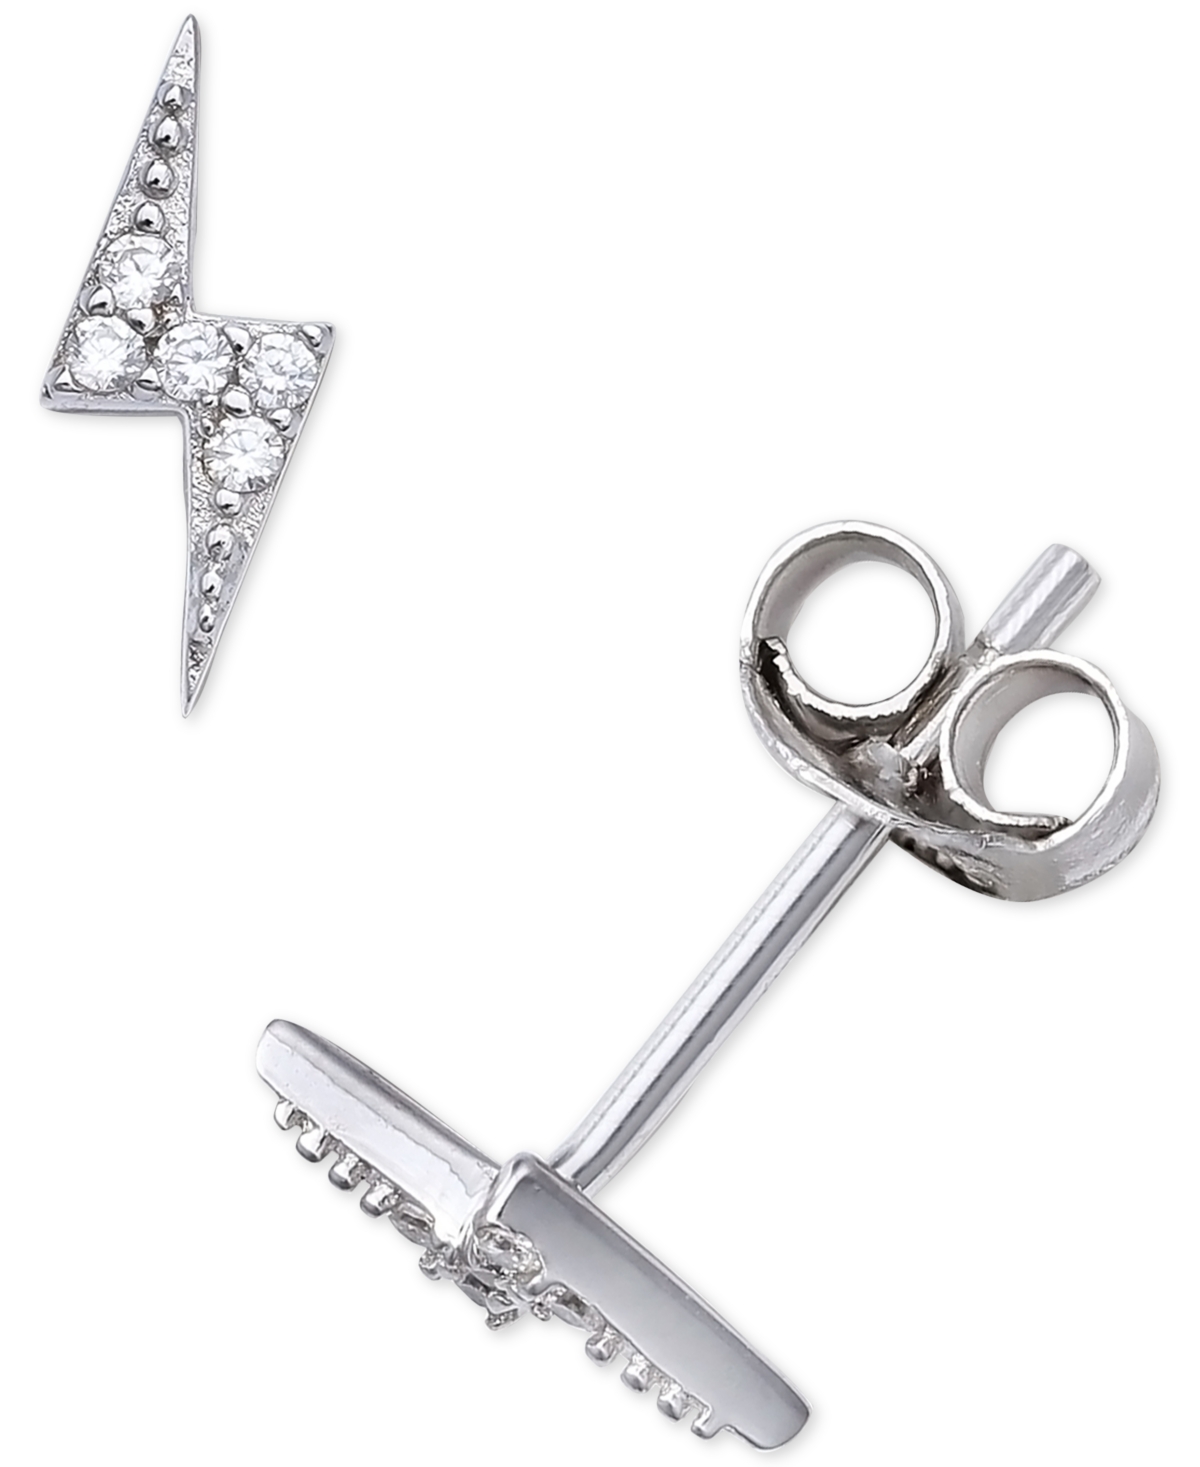 Cubic Zirconia Lightning Bolt Stud Earrings in Sterling Silver, Created for Macy's - Sterling Silver